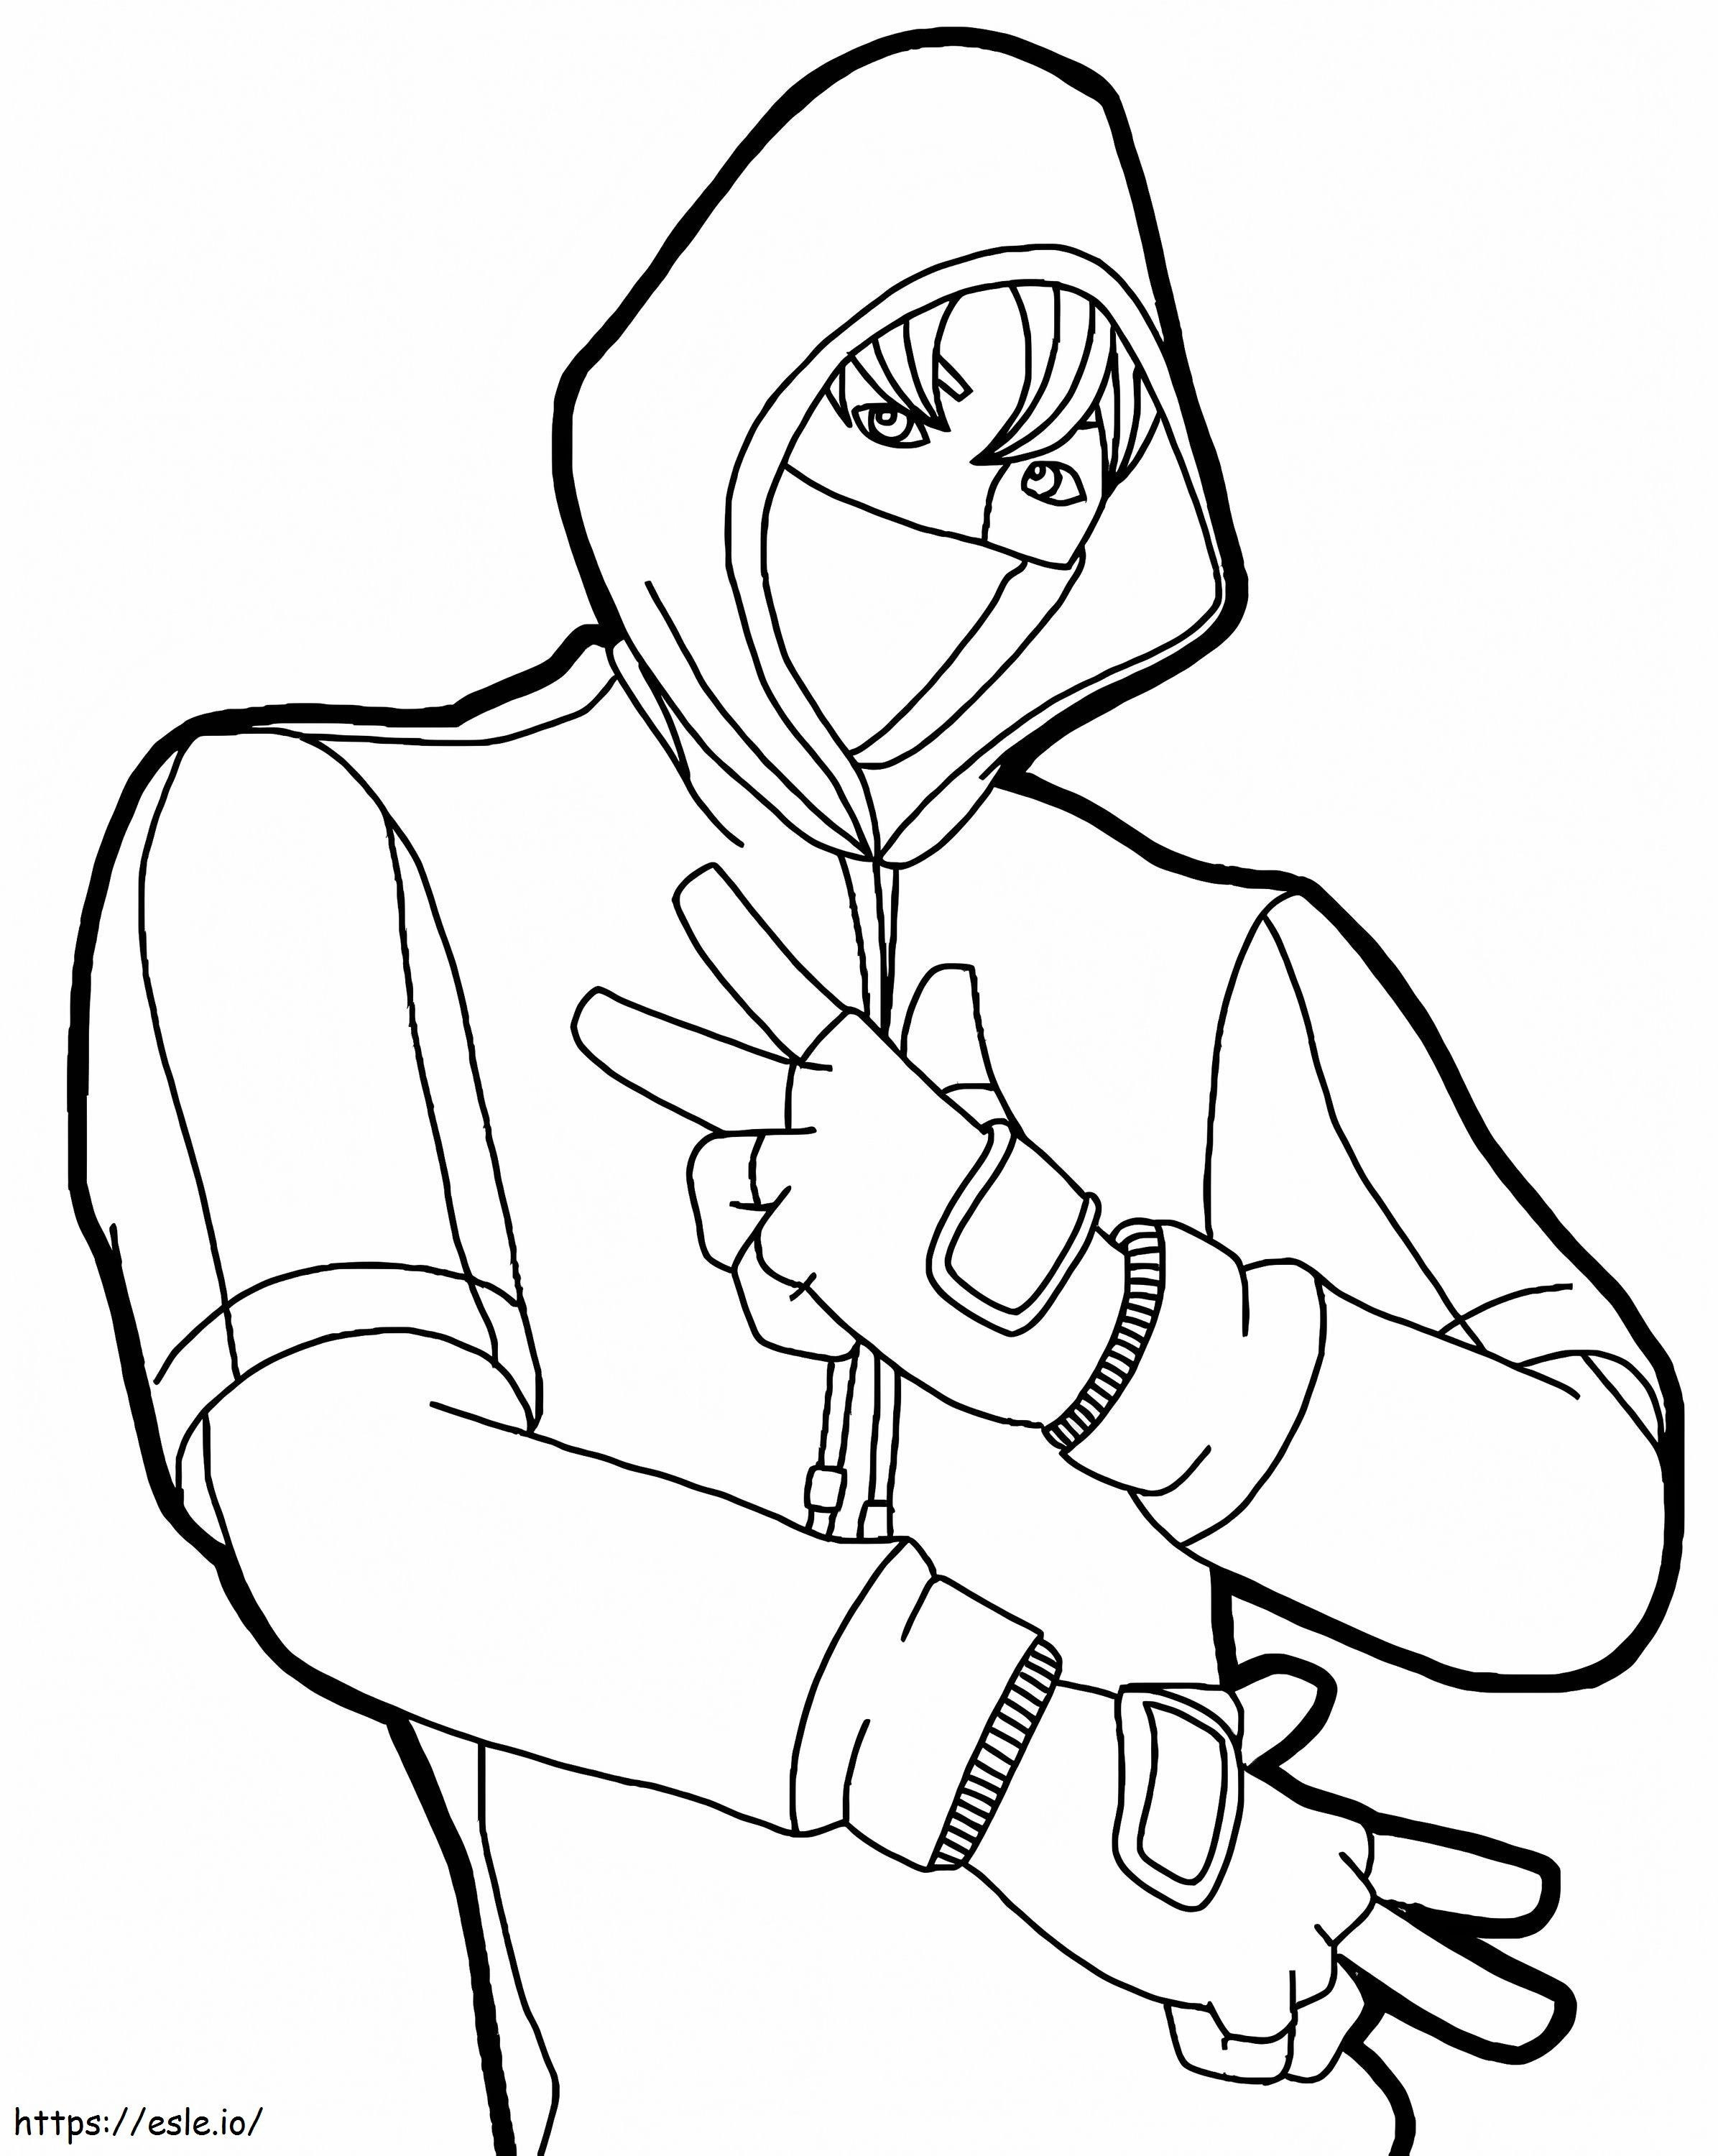 IKONIK Skin From Fortnite coloring page